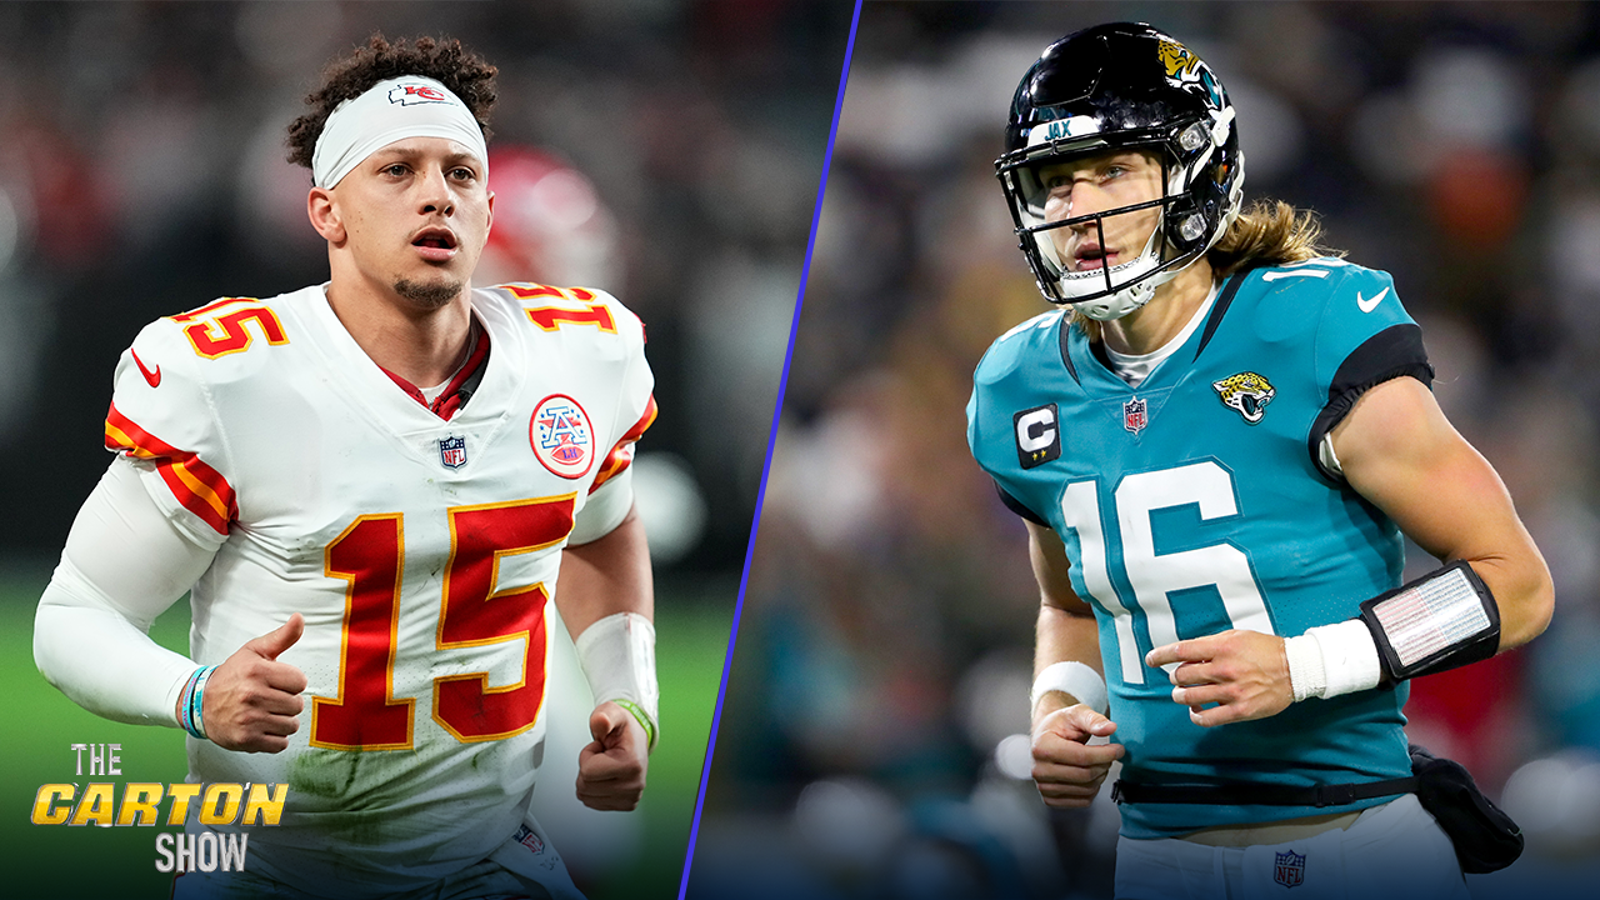 Do you give Trevor's Jaguars any chance of beating Mahomes' Chiefs?